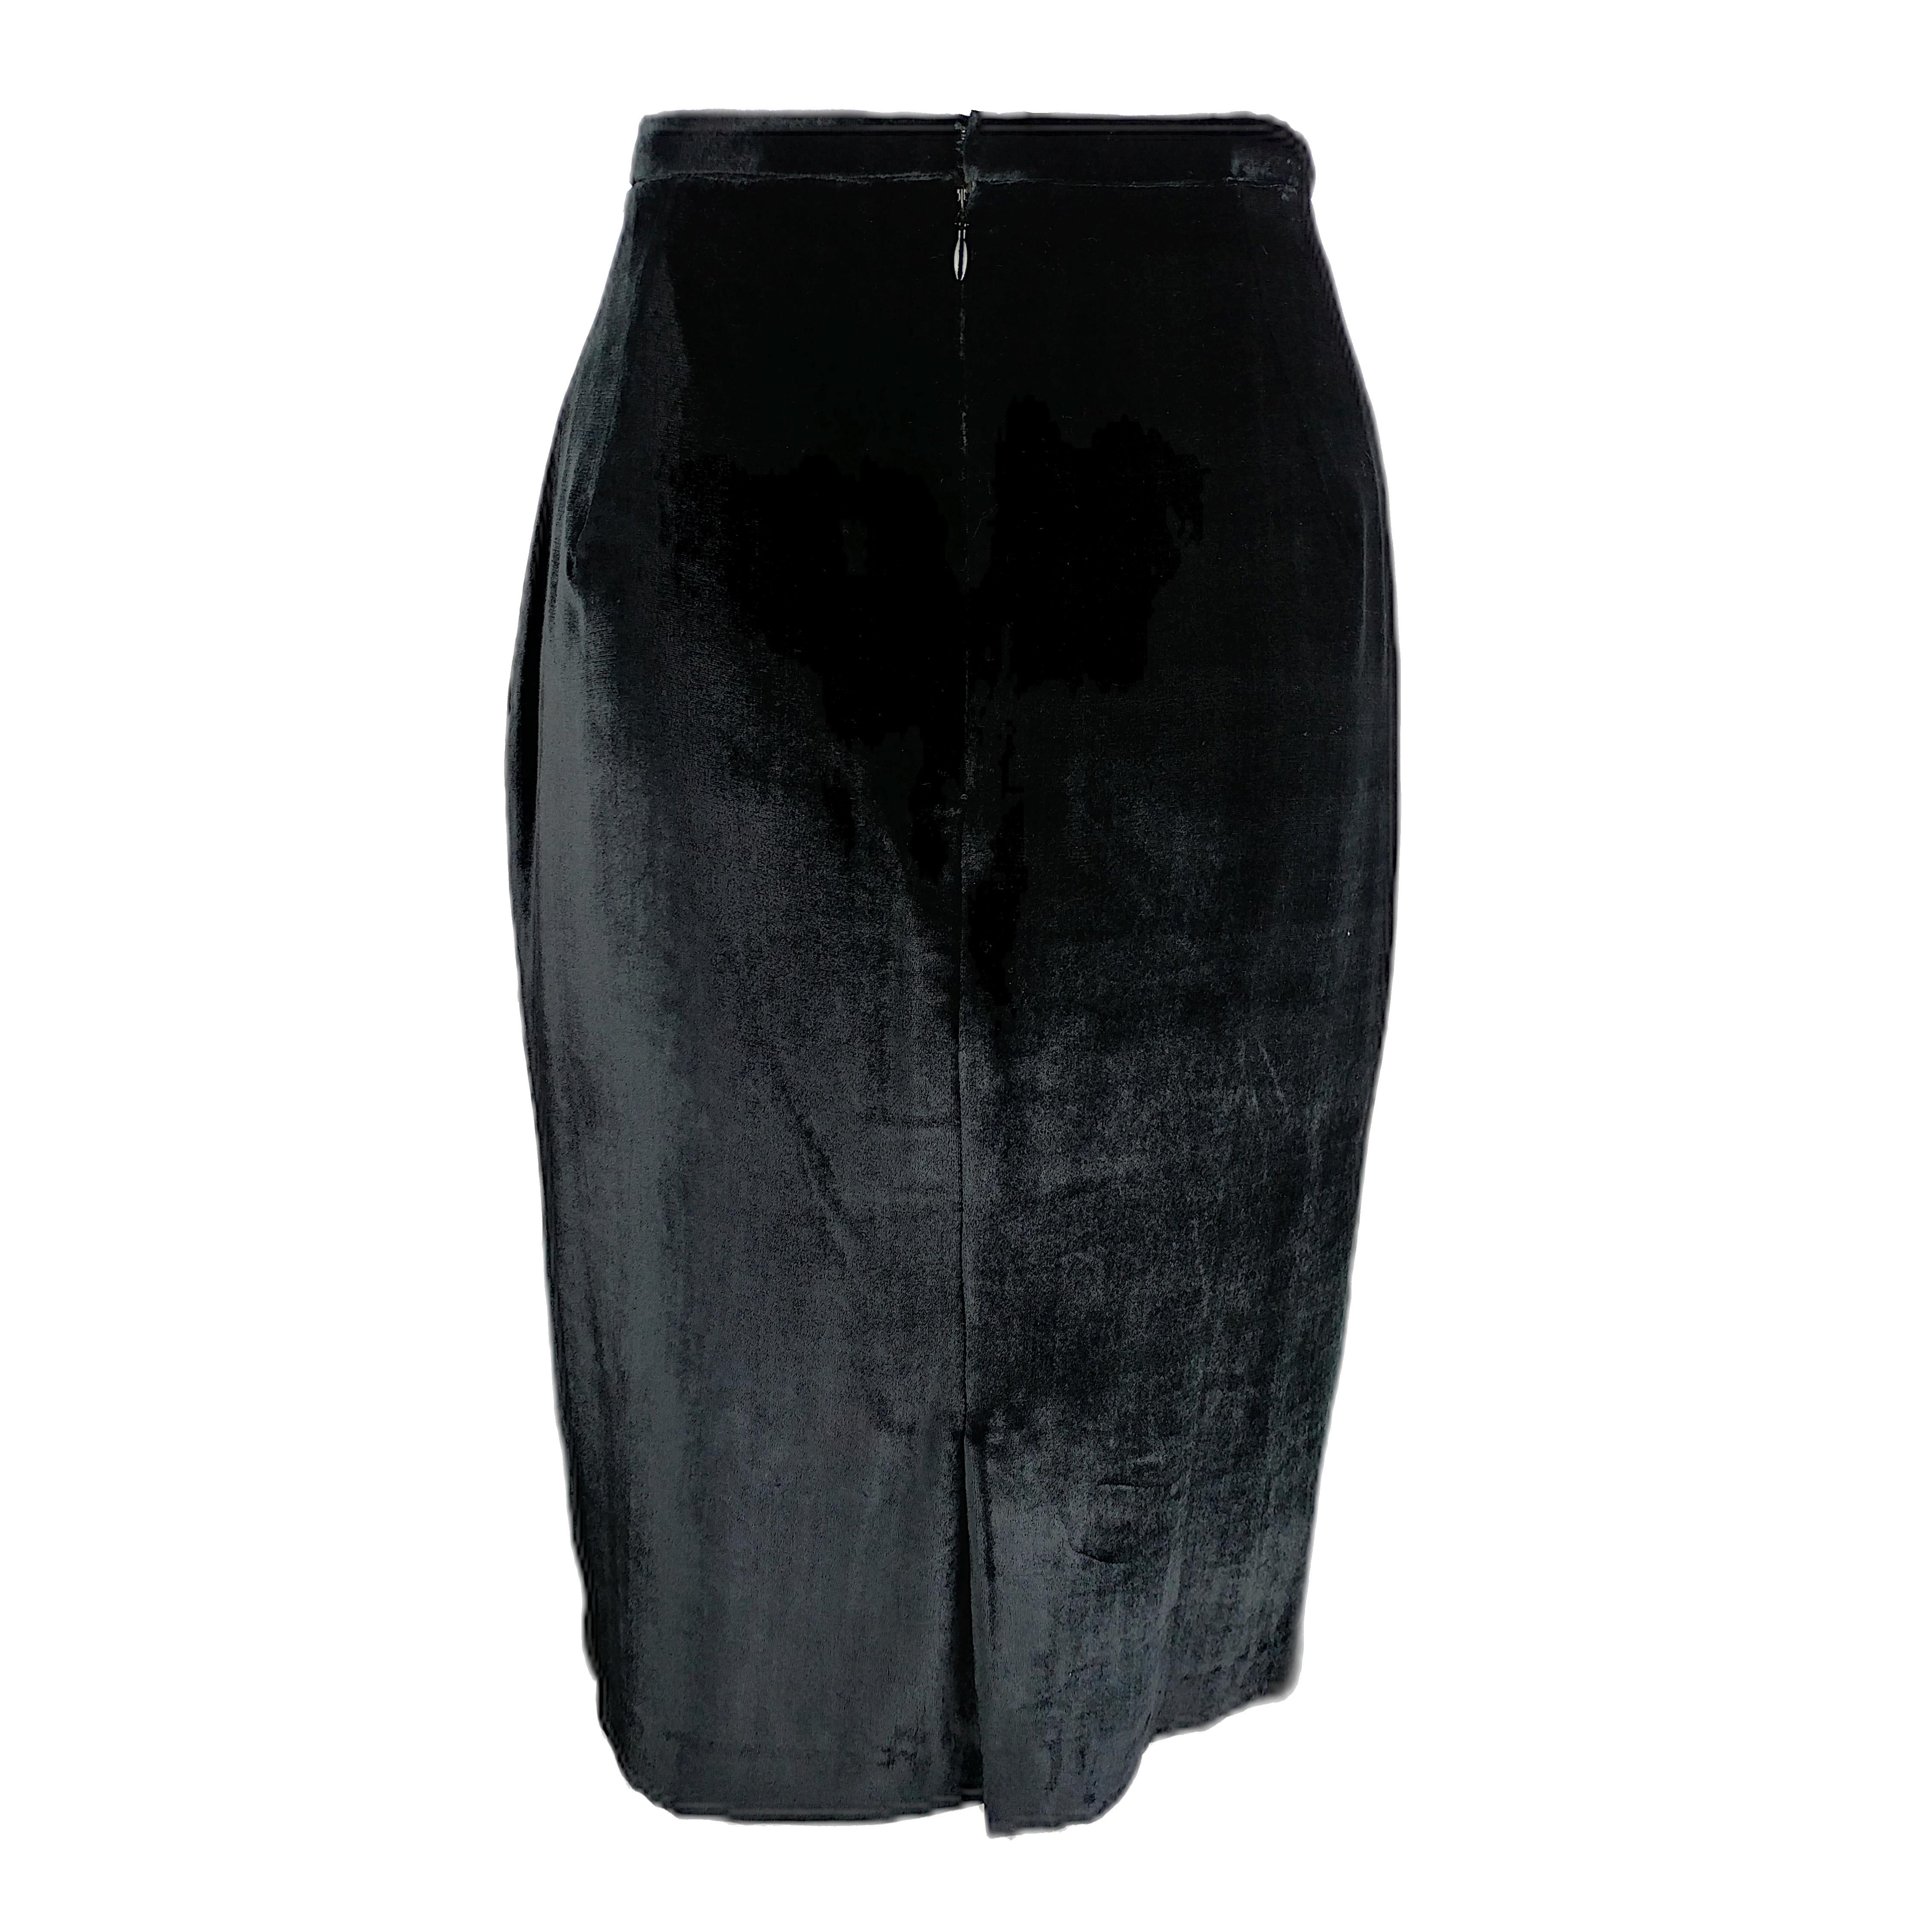 KRIZIA – 90s Vintage Black Velvet Pencil Skirt - Rayon and Silk  Size 6US 38EU In Excellent Condition For Sale In Cuggiono, MI